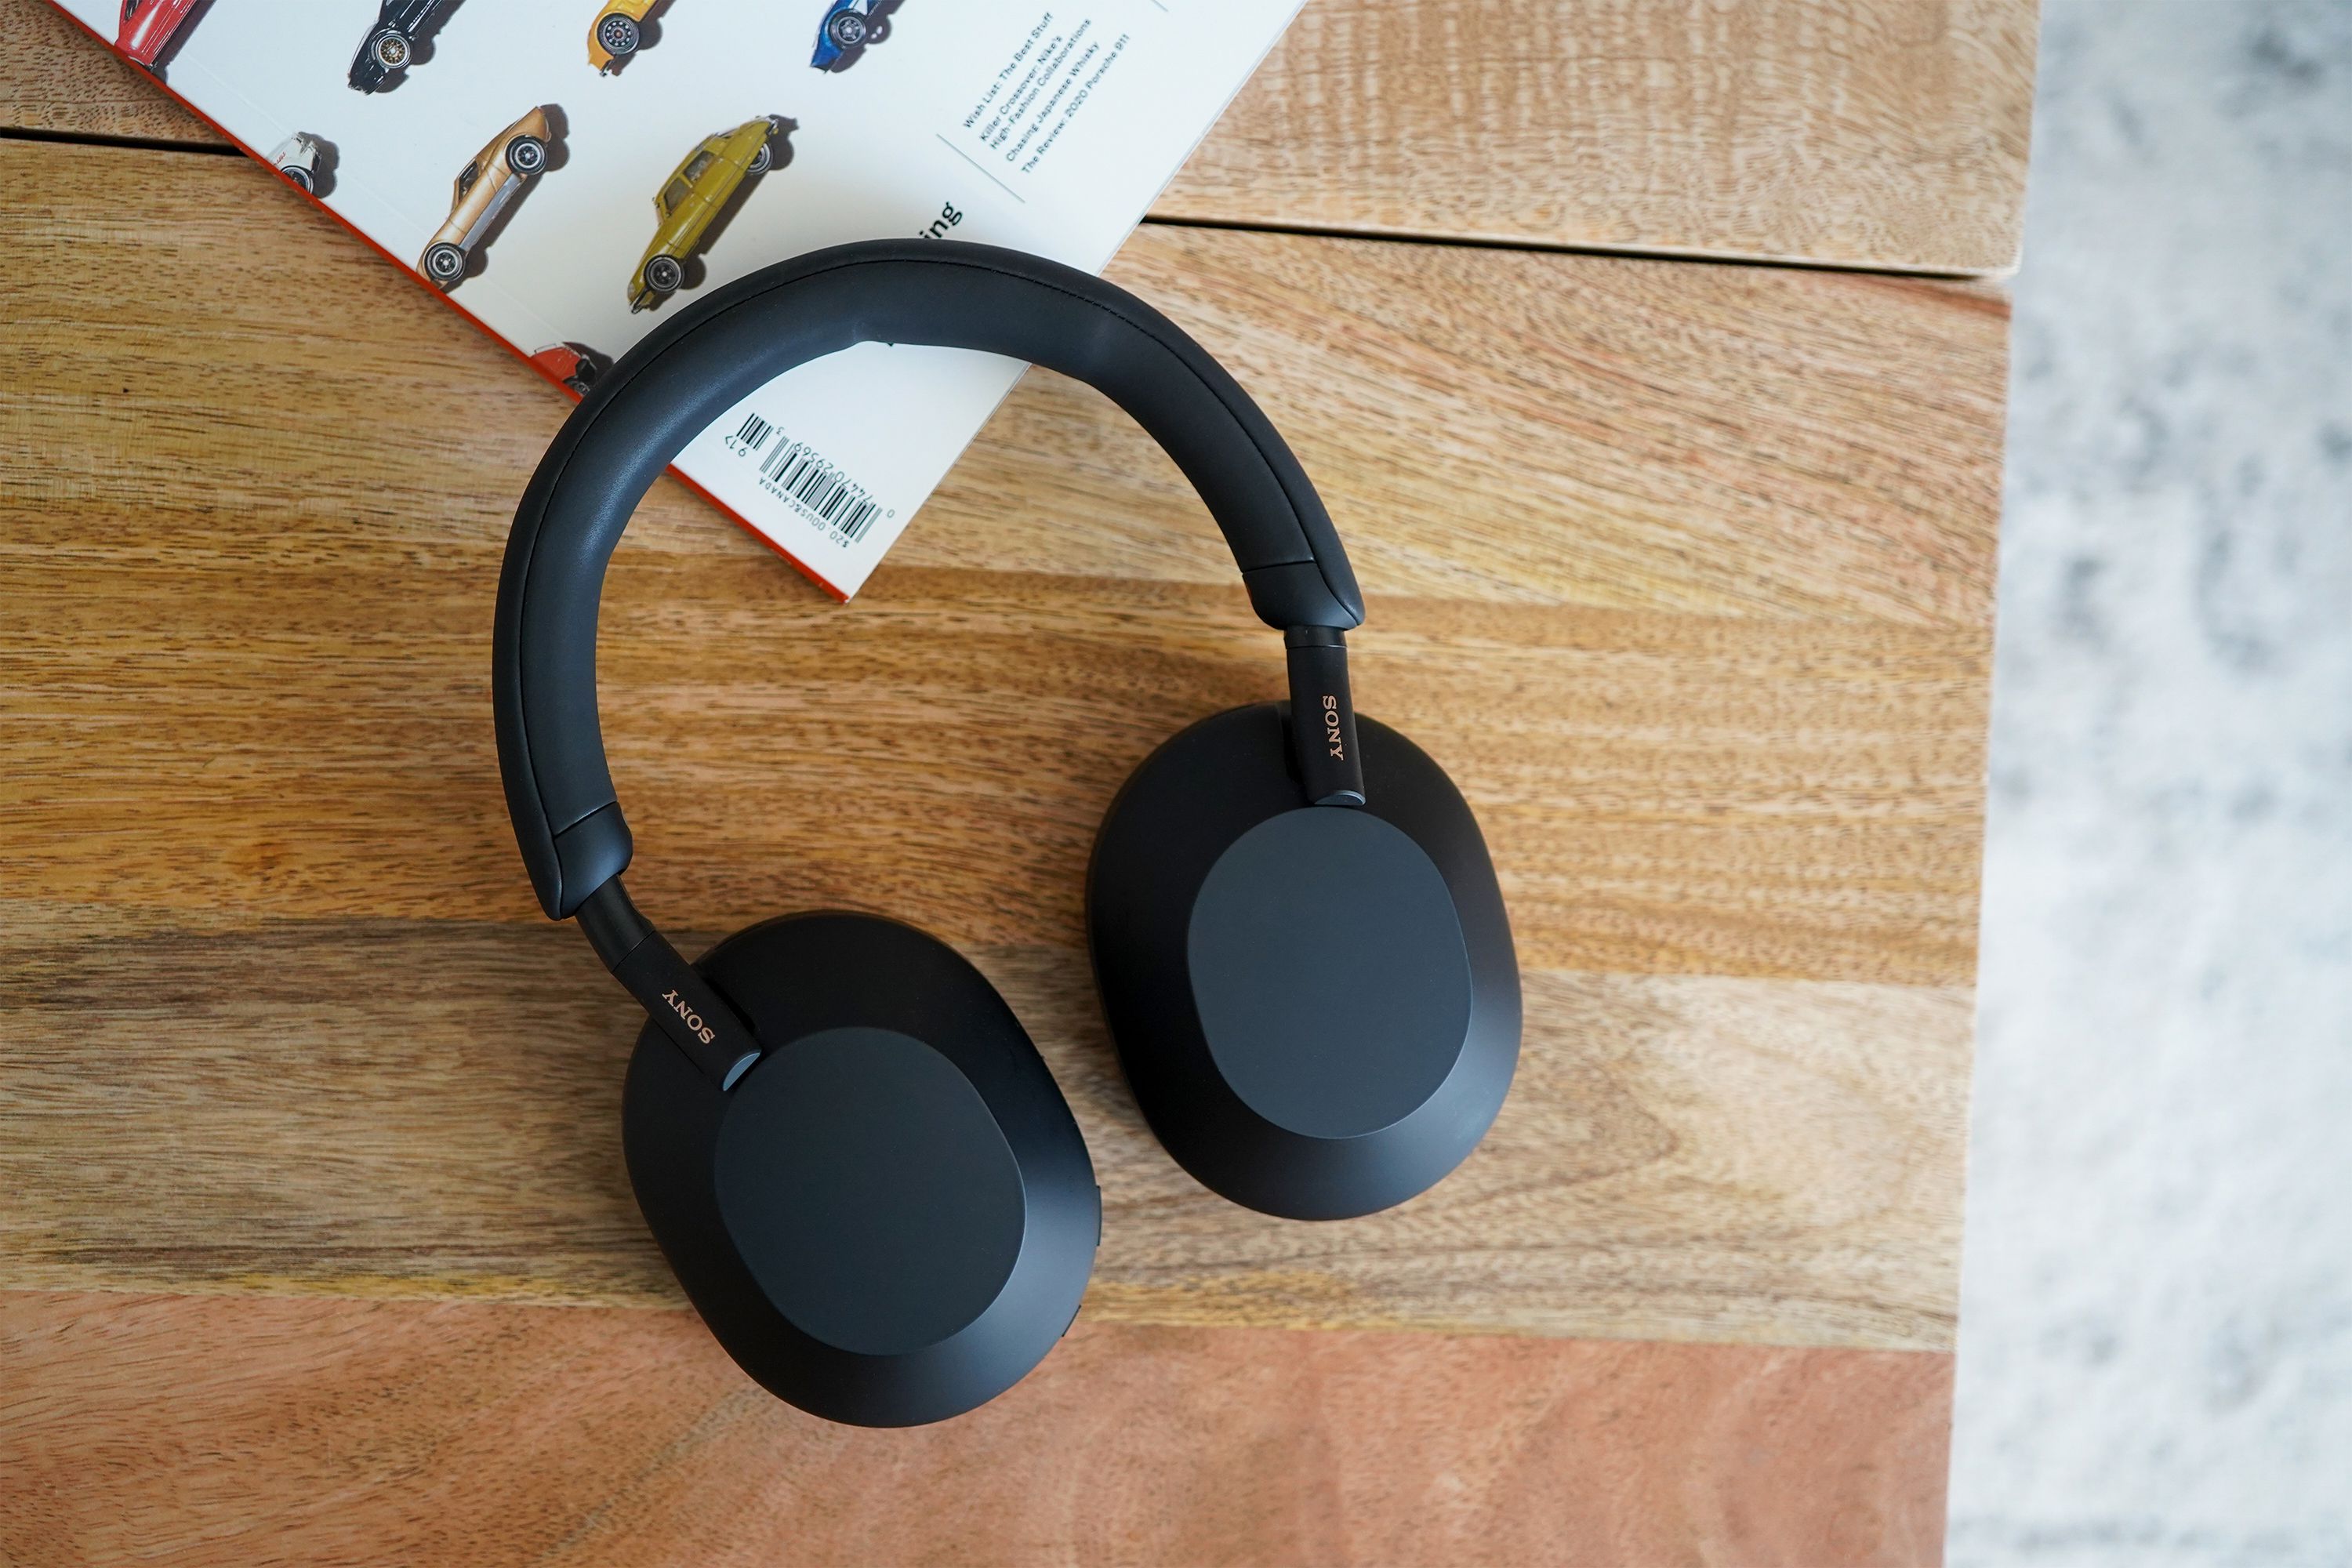 The Complete Guide to Sony's Wireless Headphones and Earbuds